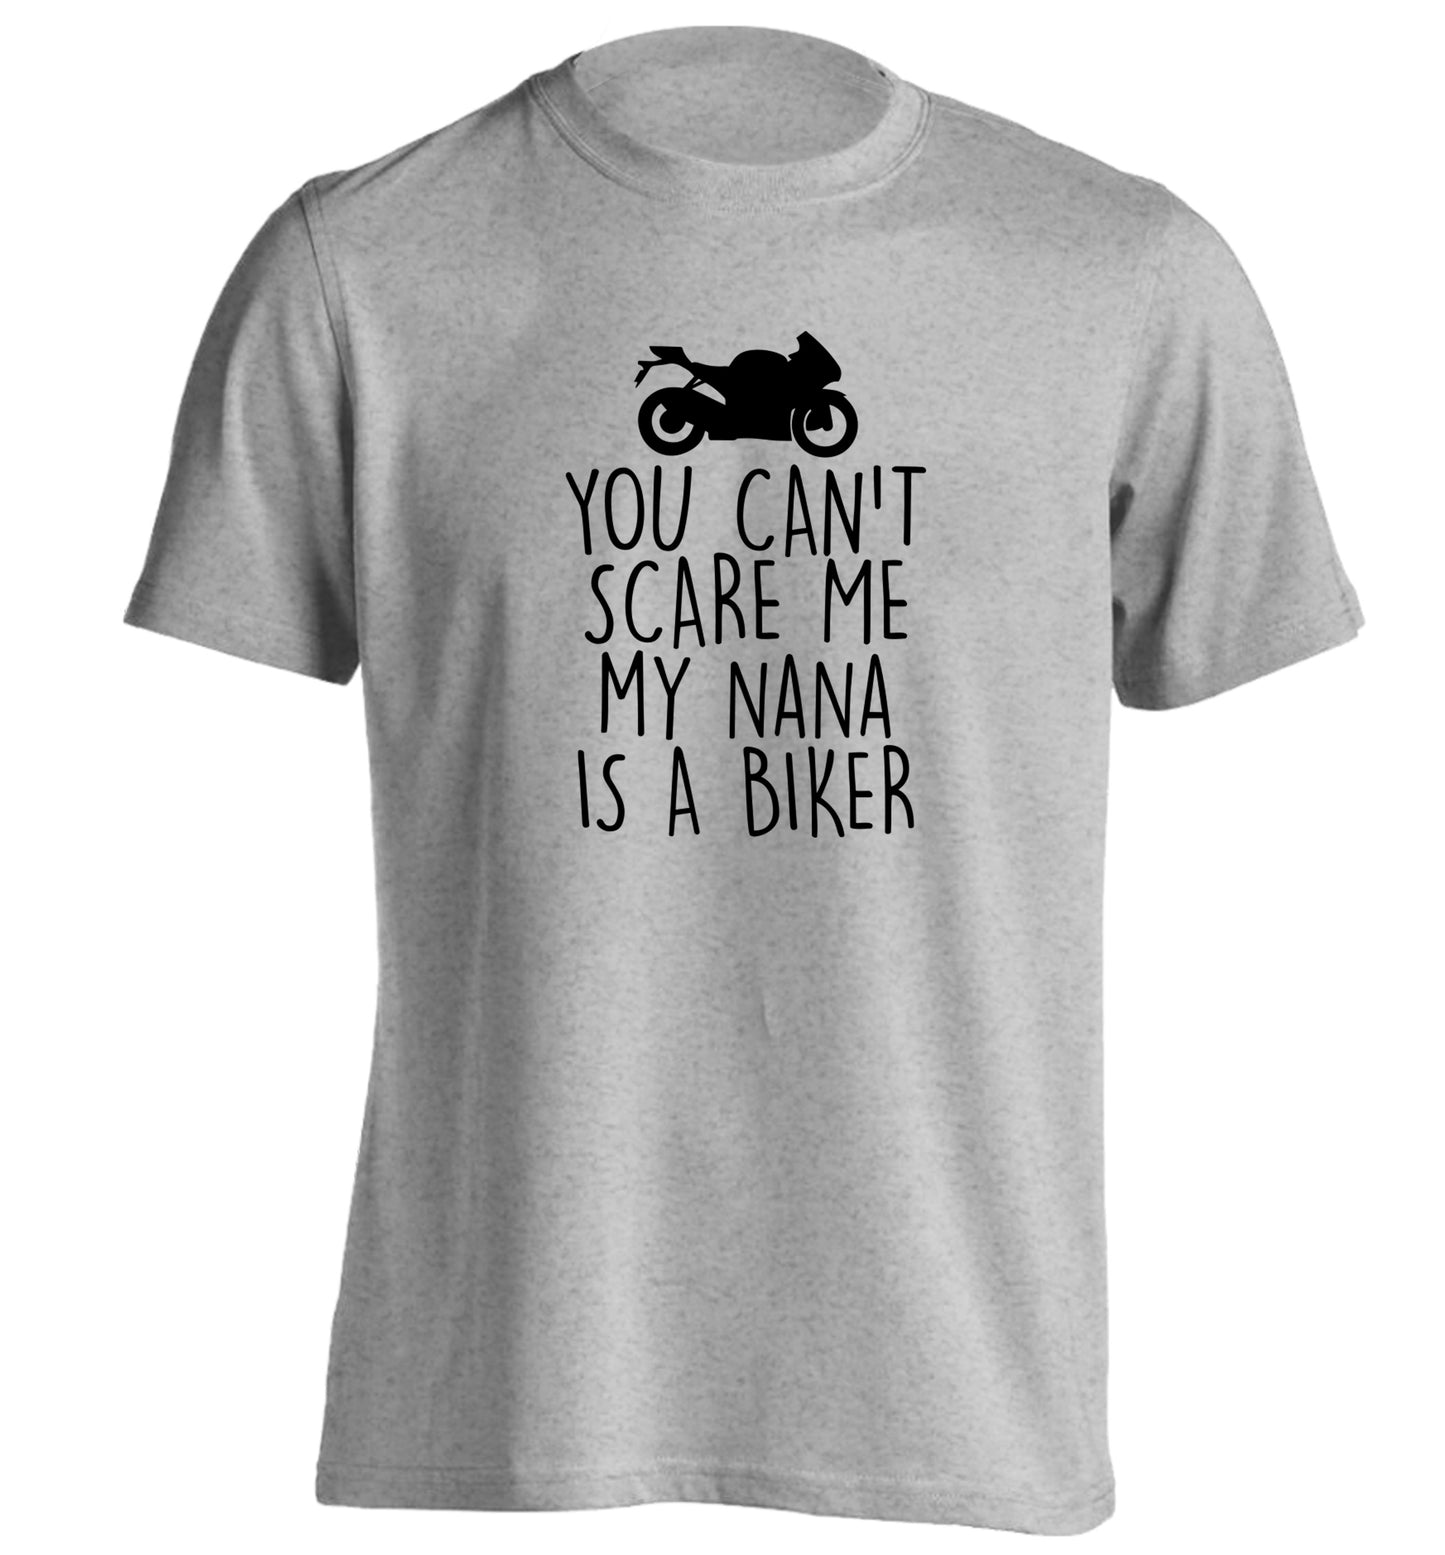 You can't scare me my nana is a biker adults unisex grey Tshirt 2XL